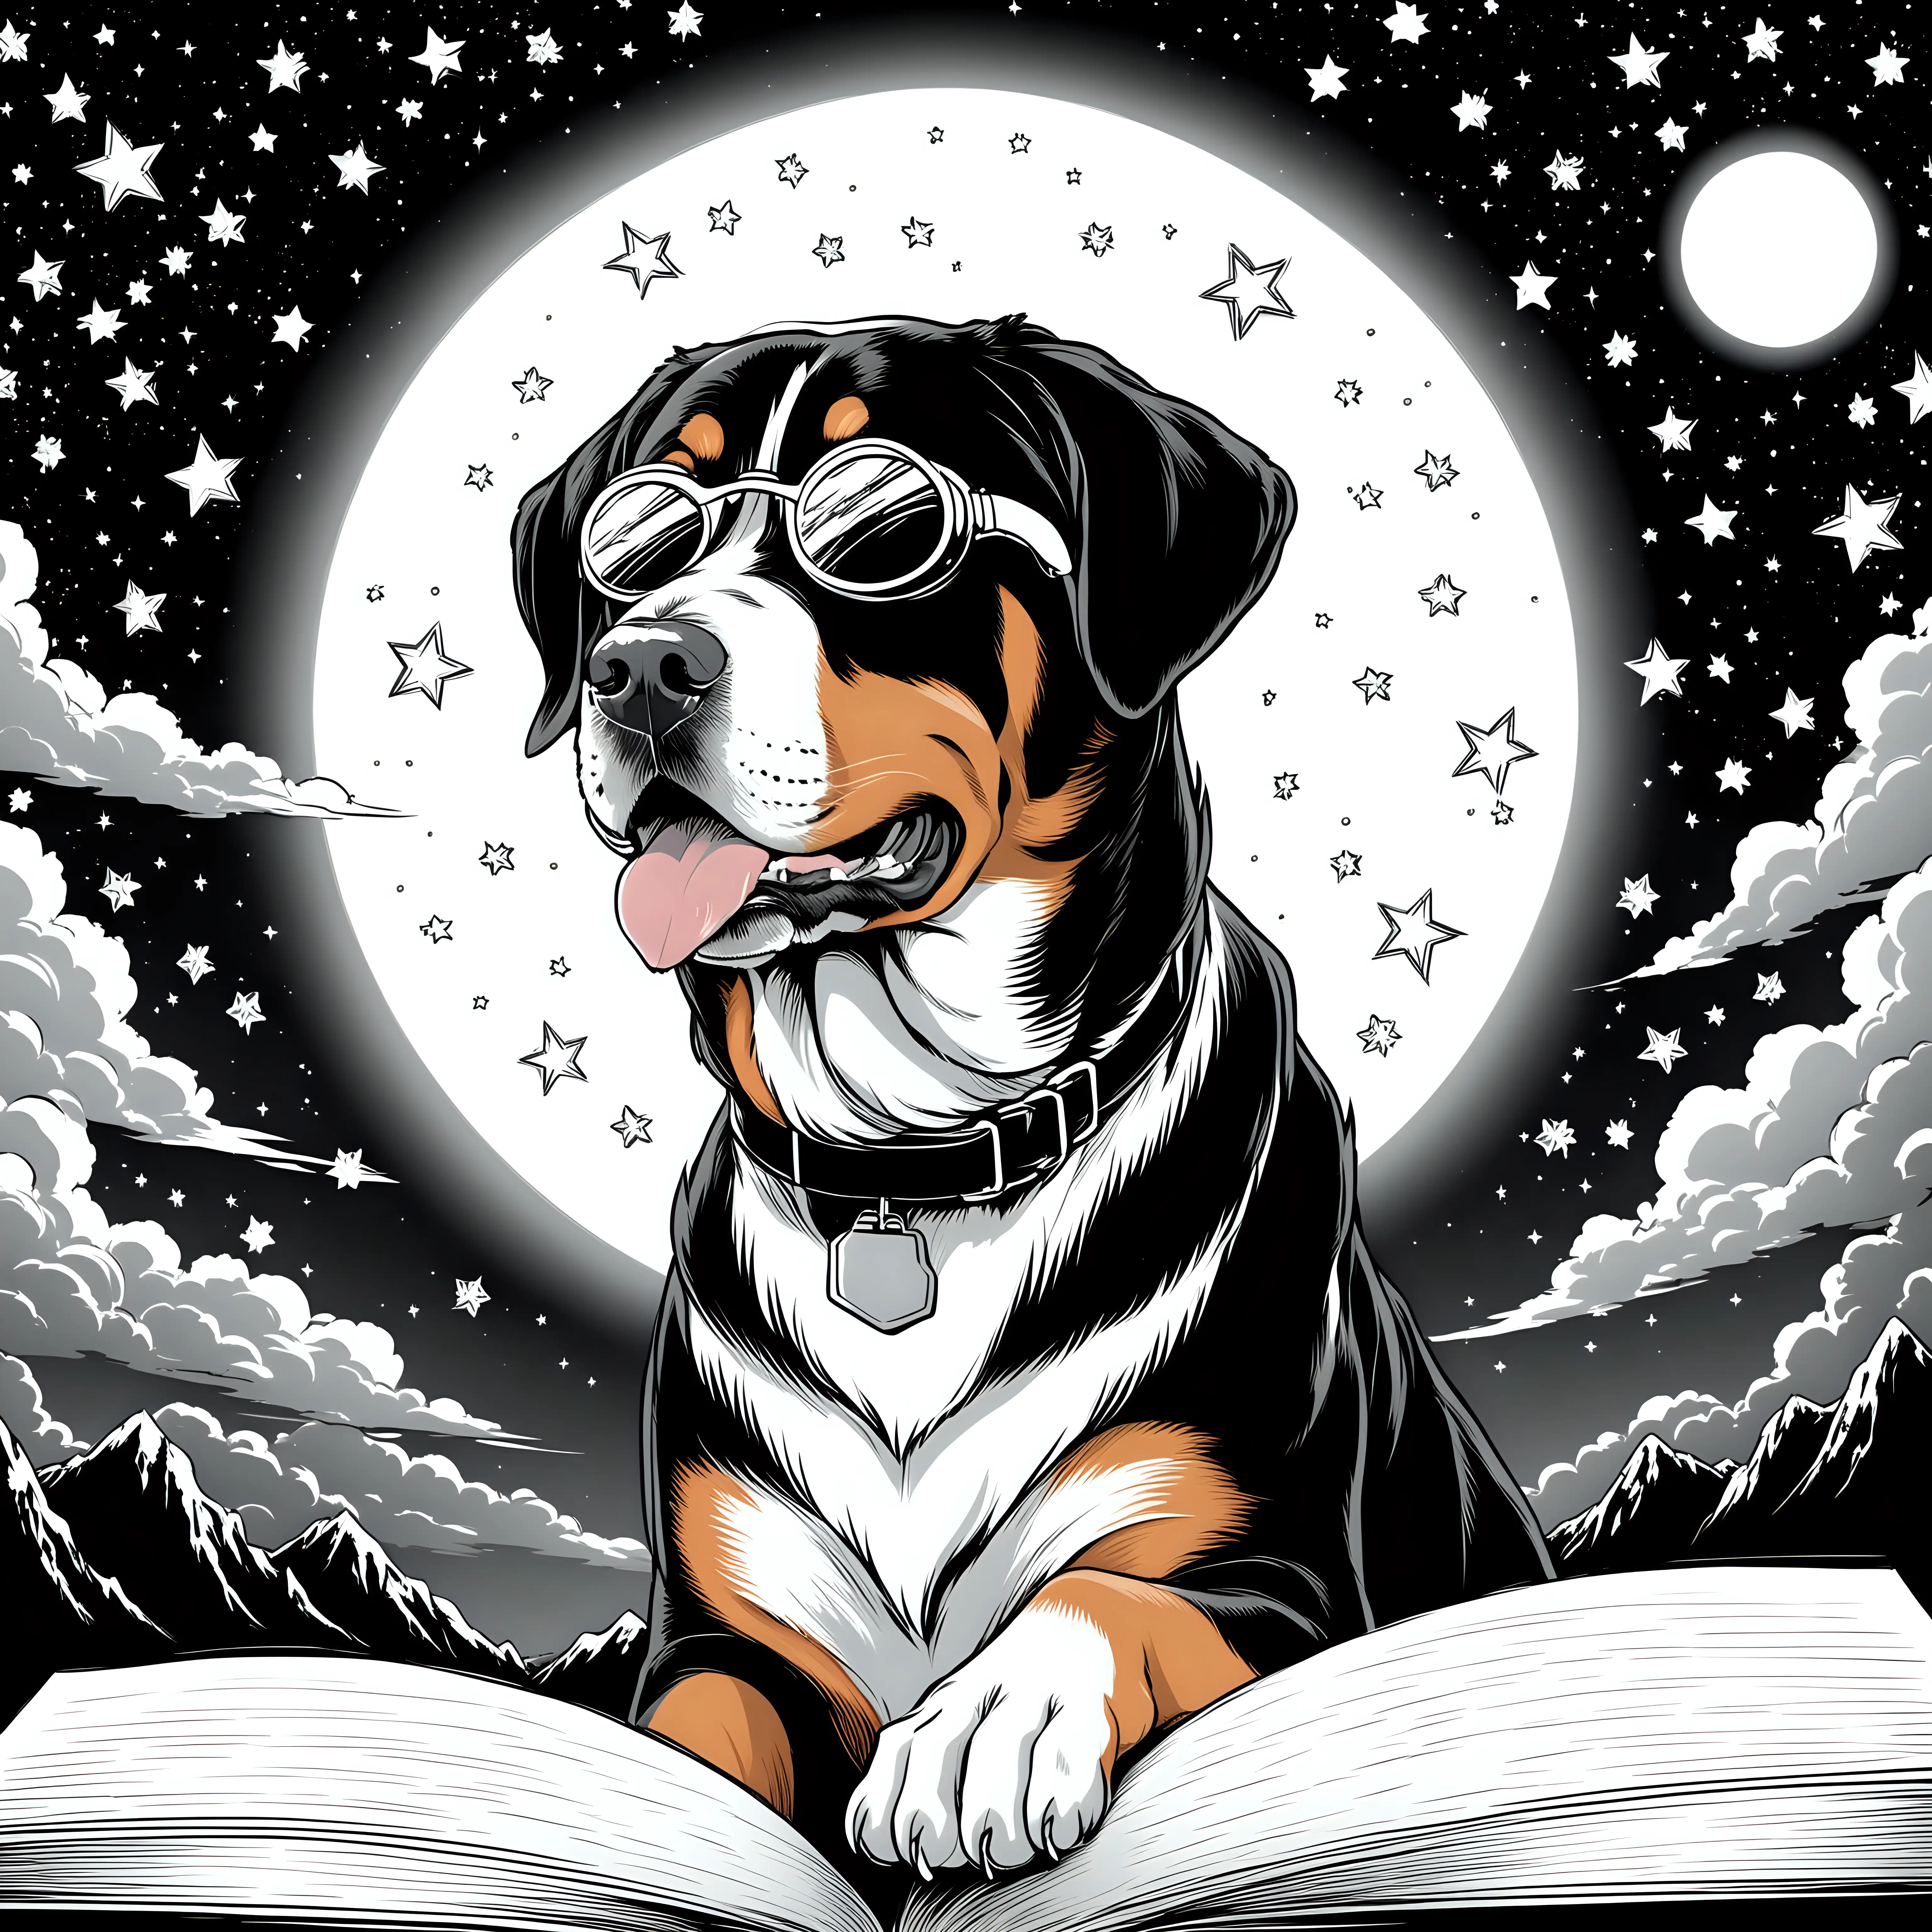 Greater Swiss Mountain Dog Wearing Eclipse Glasses Gazing at Black and White Sun in Dramatic Starry Sky